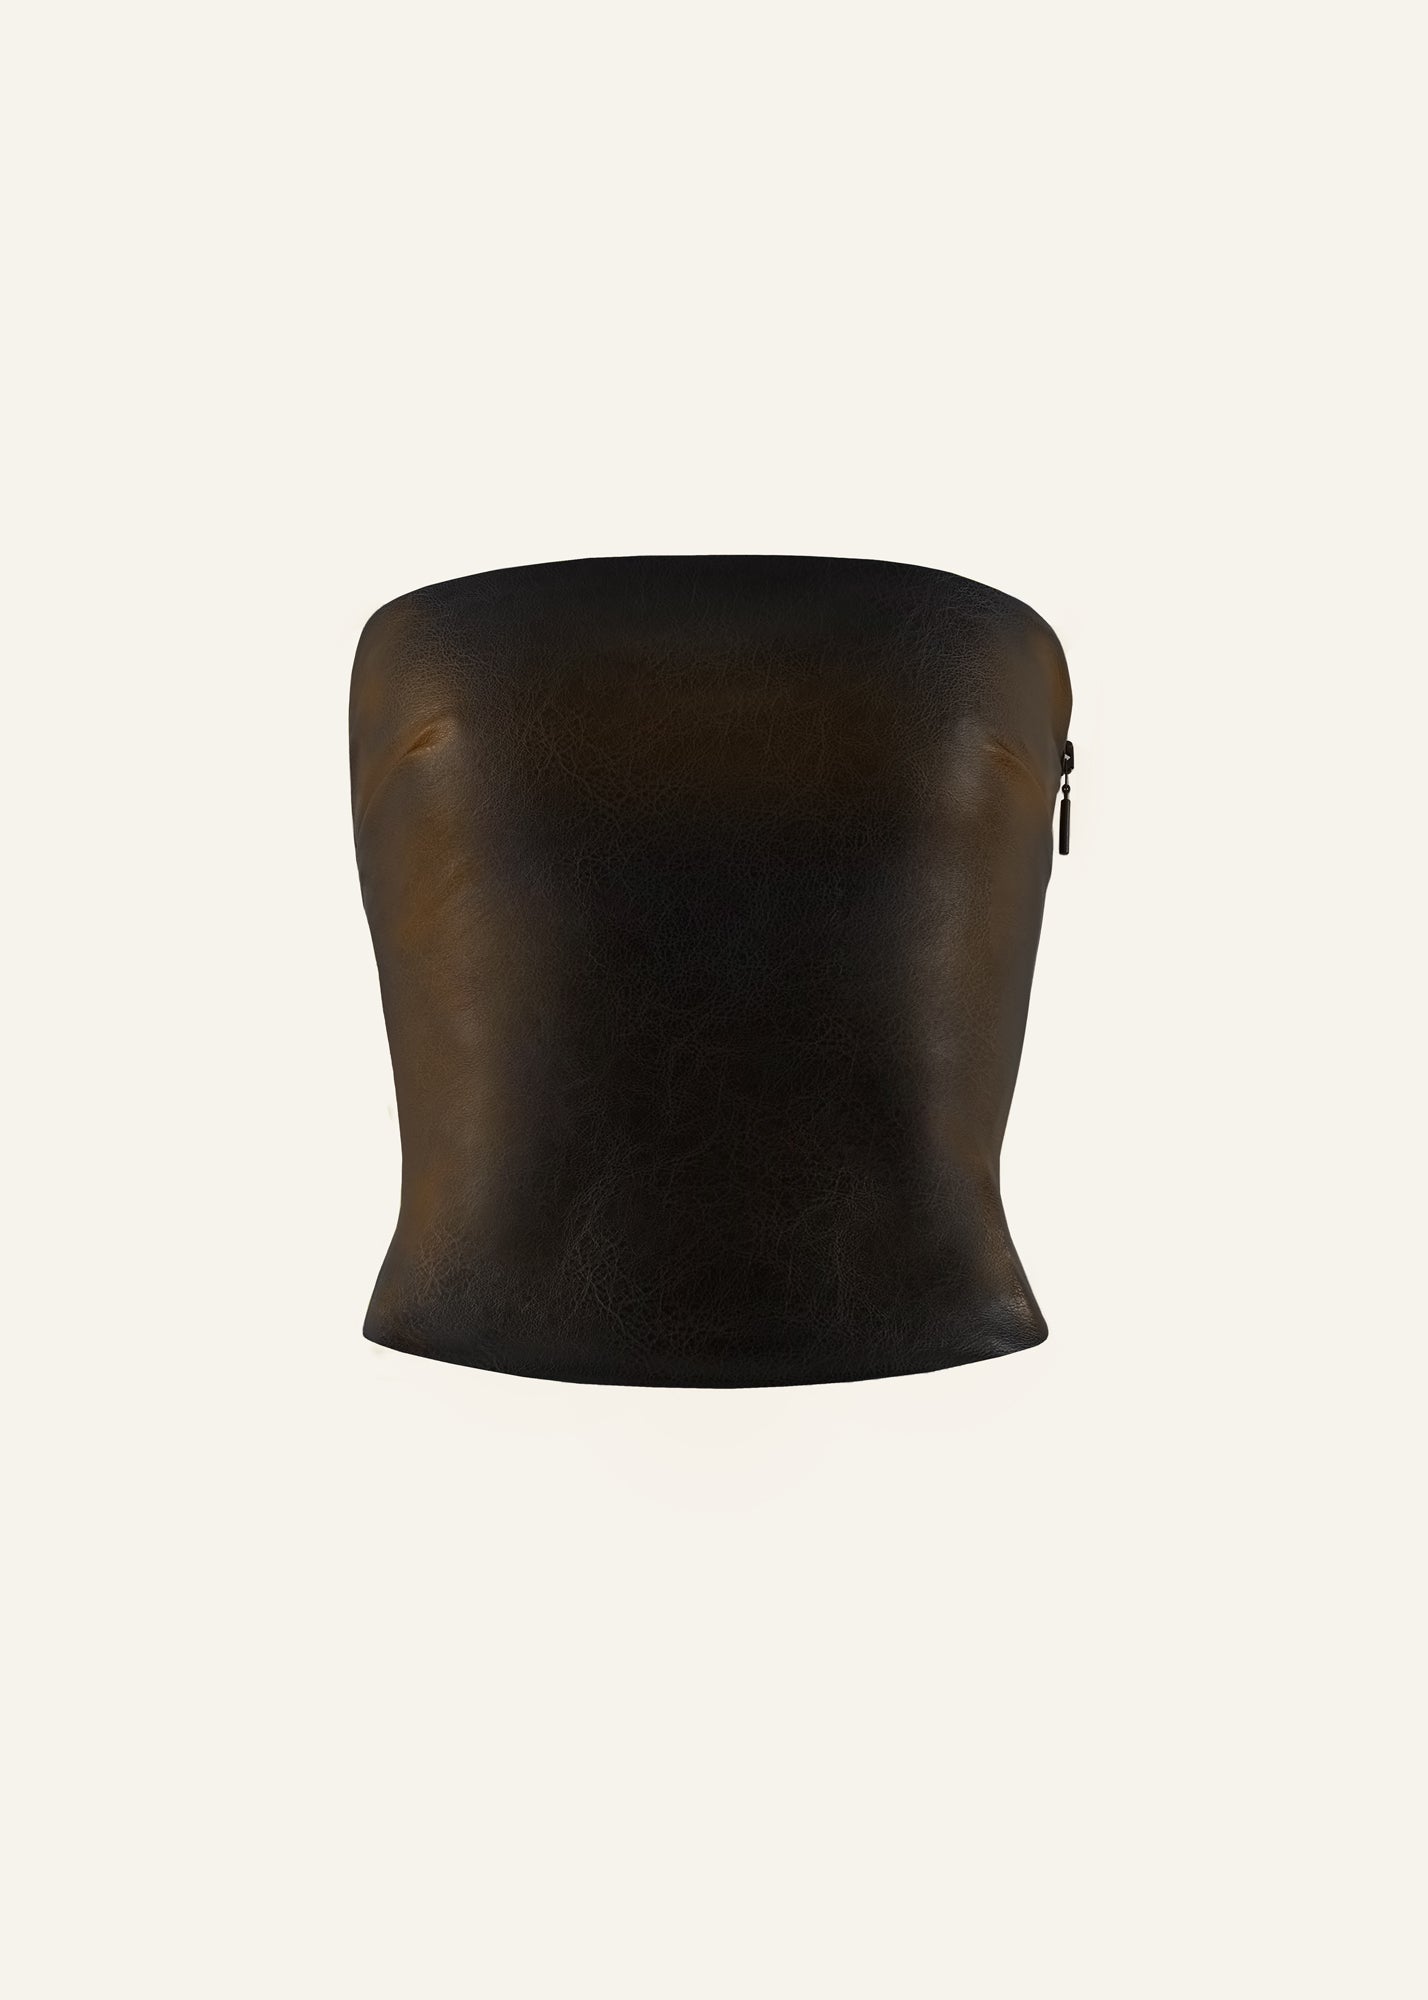 Product photo of a brown vegan leather tube top